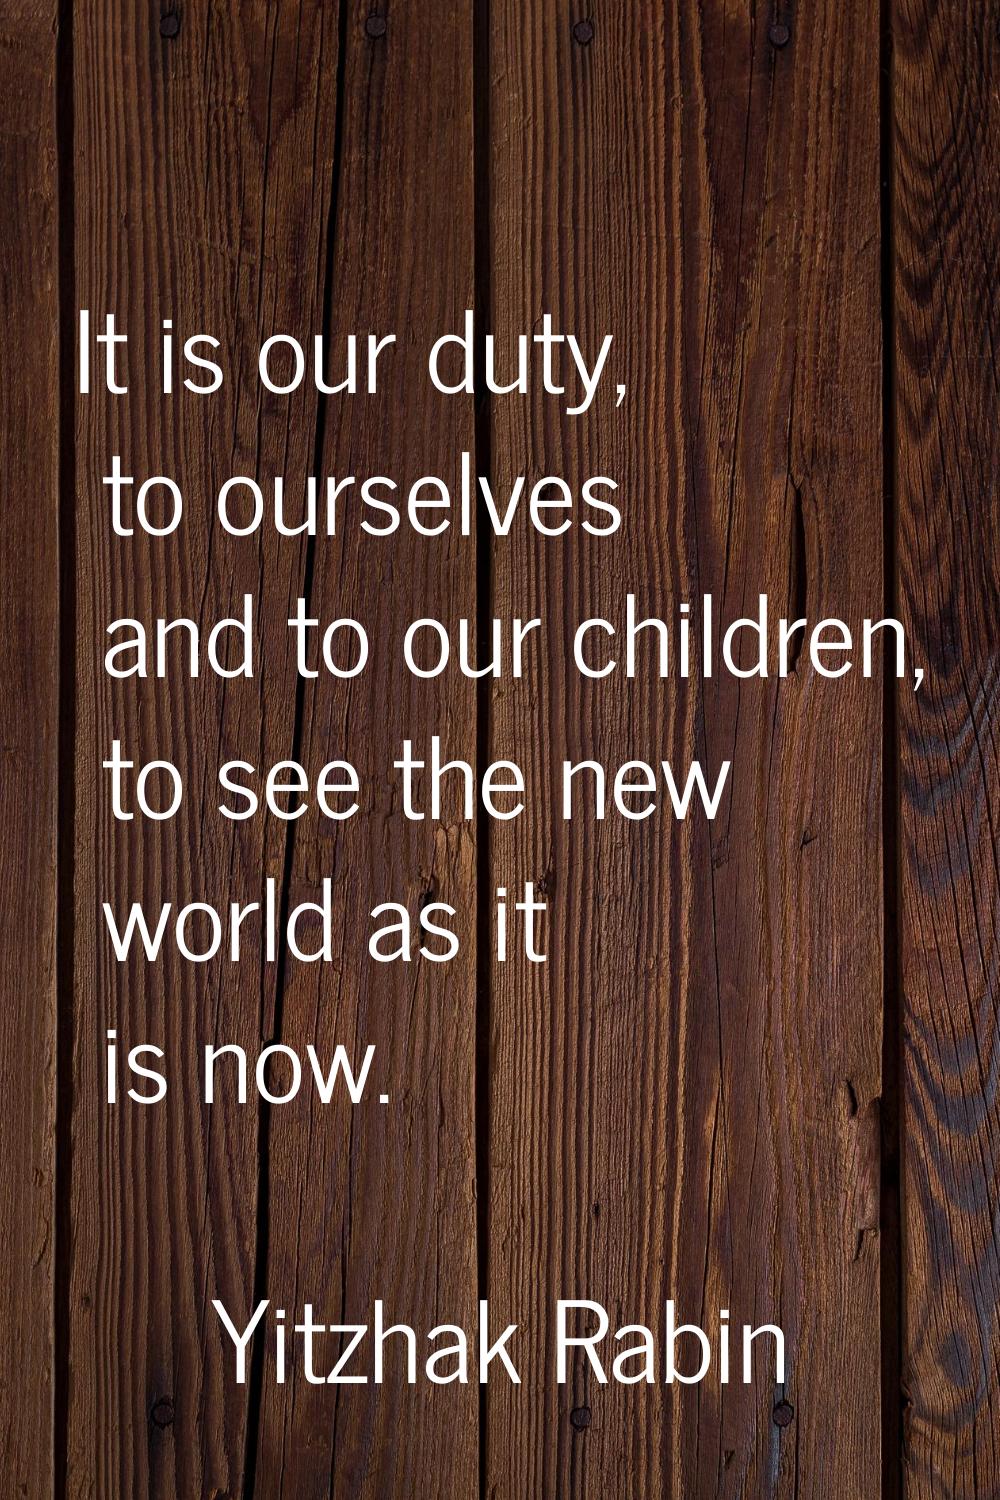 It is our duty, to ourselves and to our children, to see the new world as it is now.